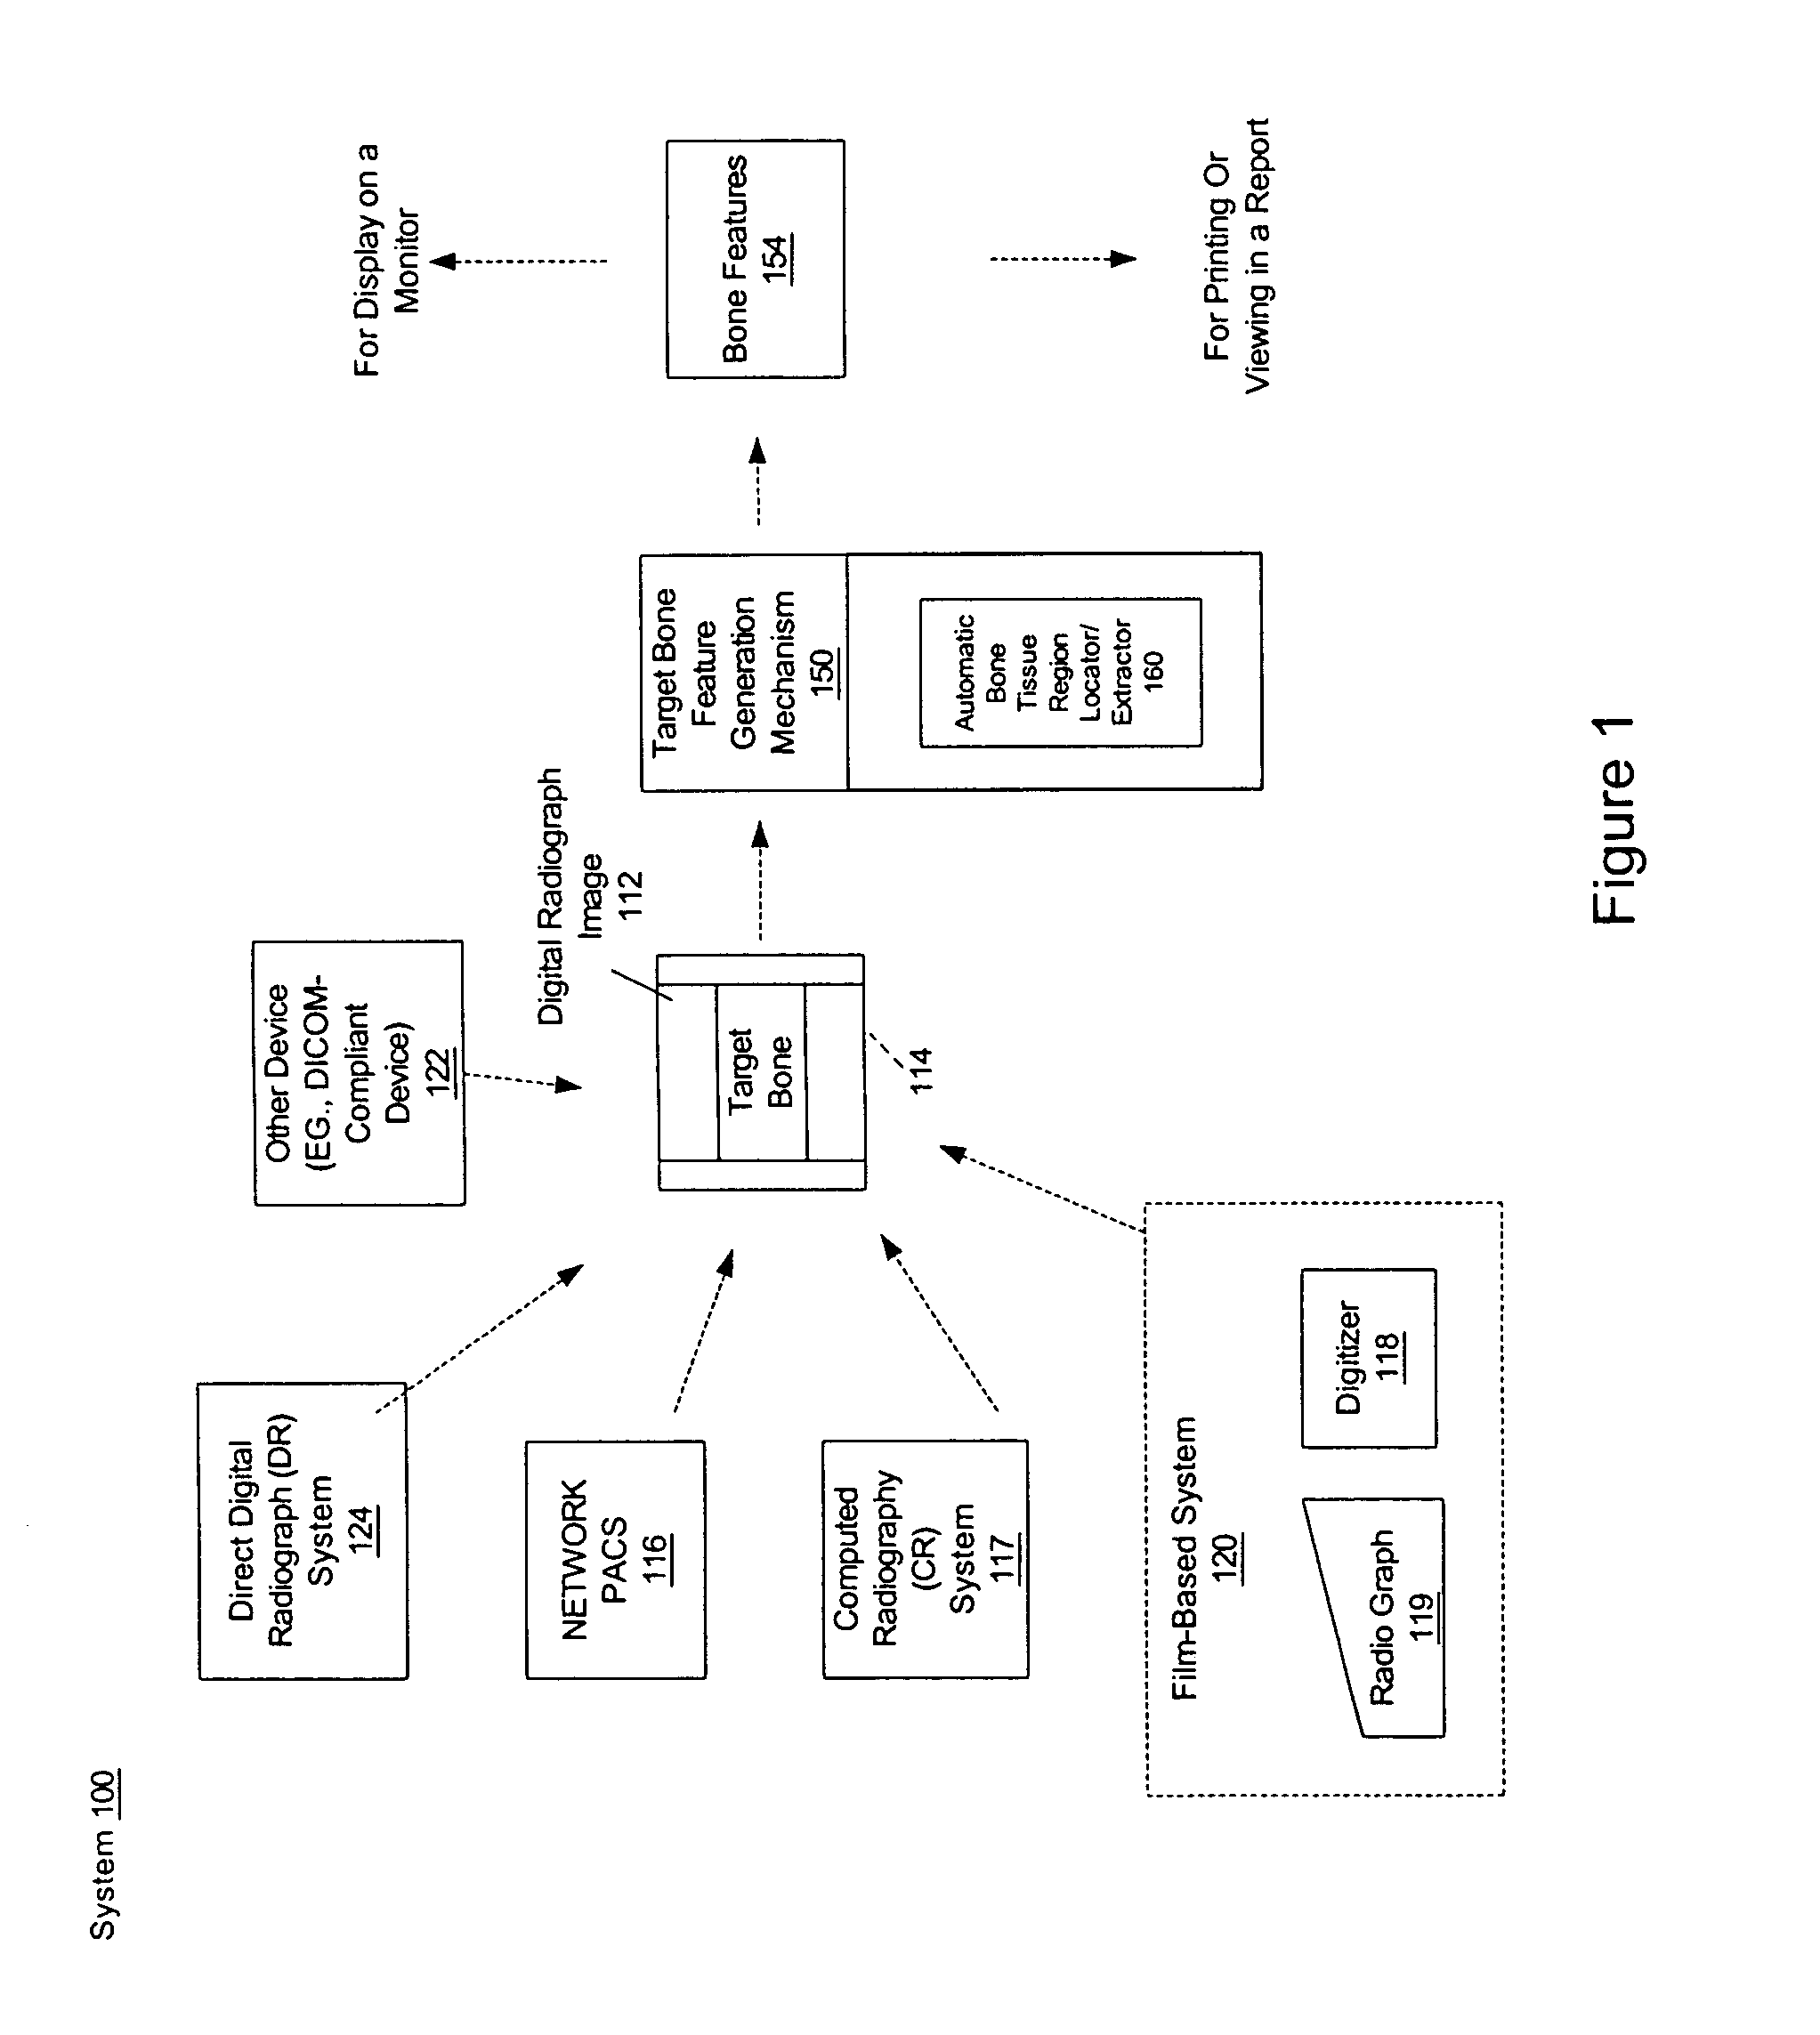 Method and system for automatically identifying regions of trabecular bone tissue and cortical bone tissue of a target bone from a digital radiograph image